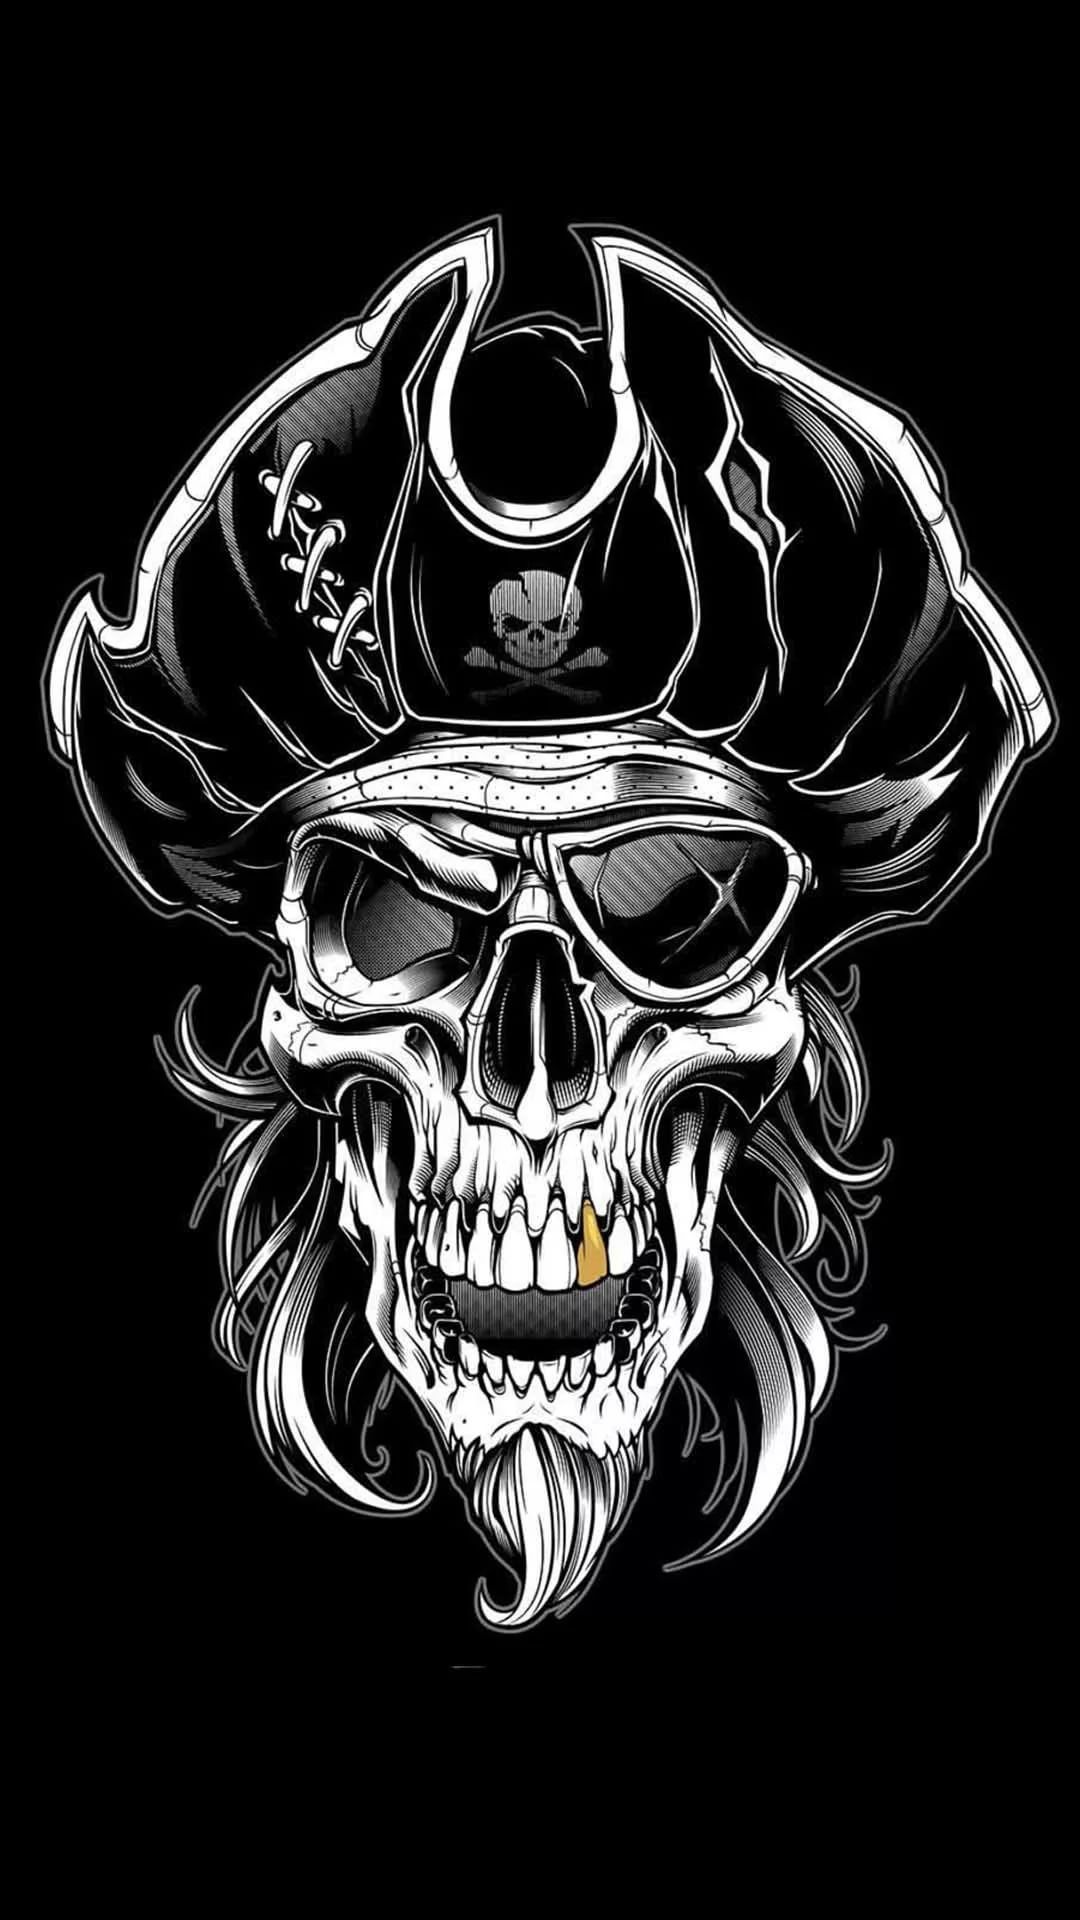 Cool Skull iPhone wallpaper size